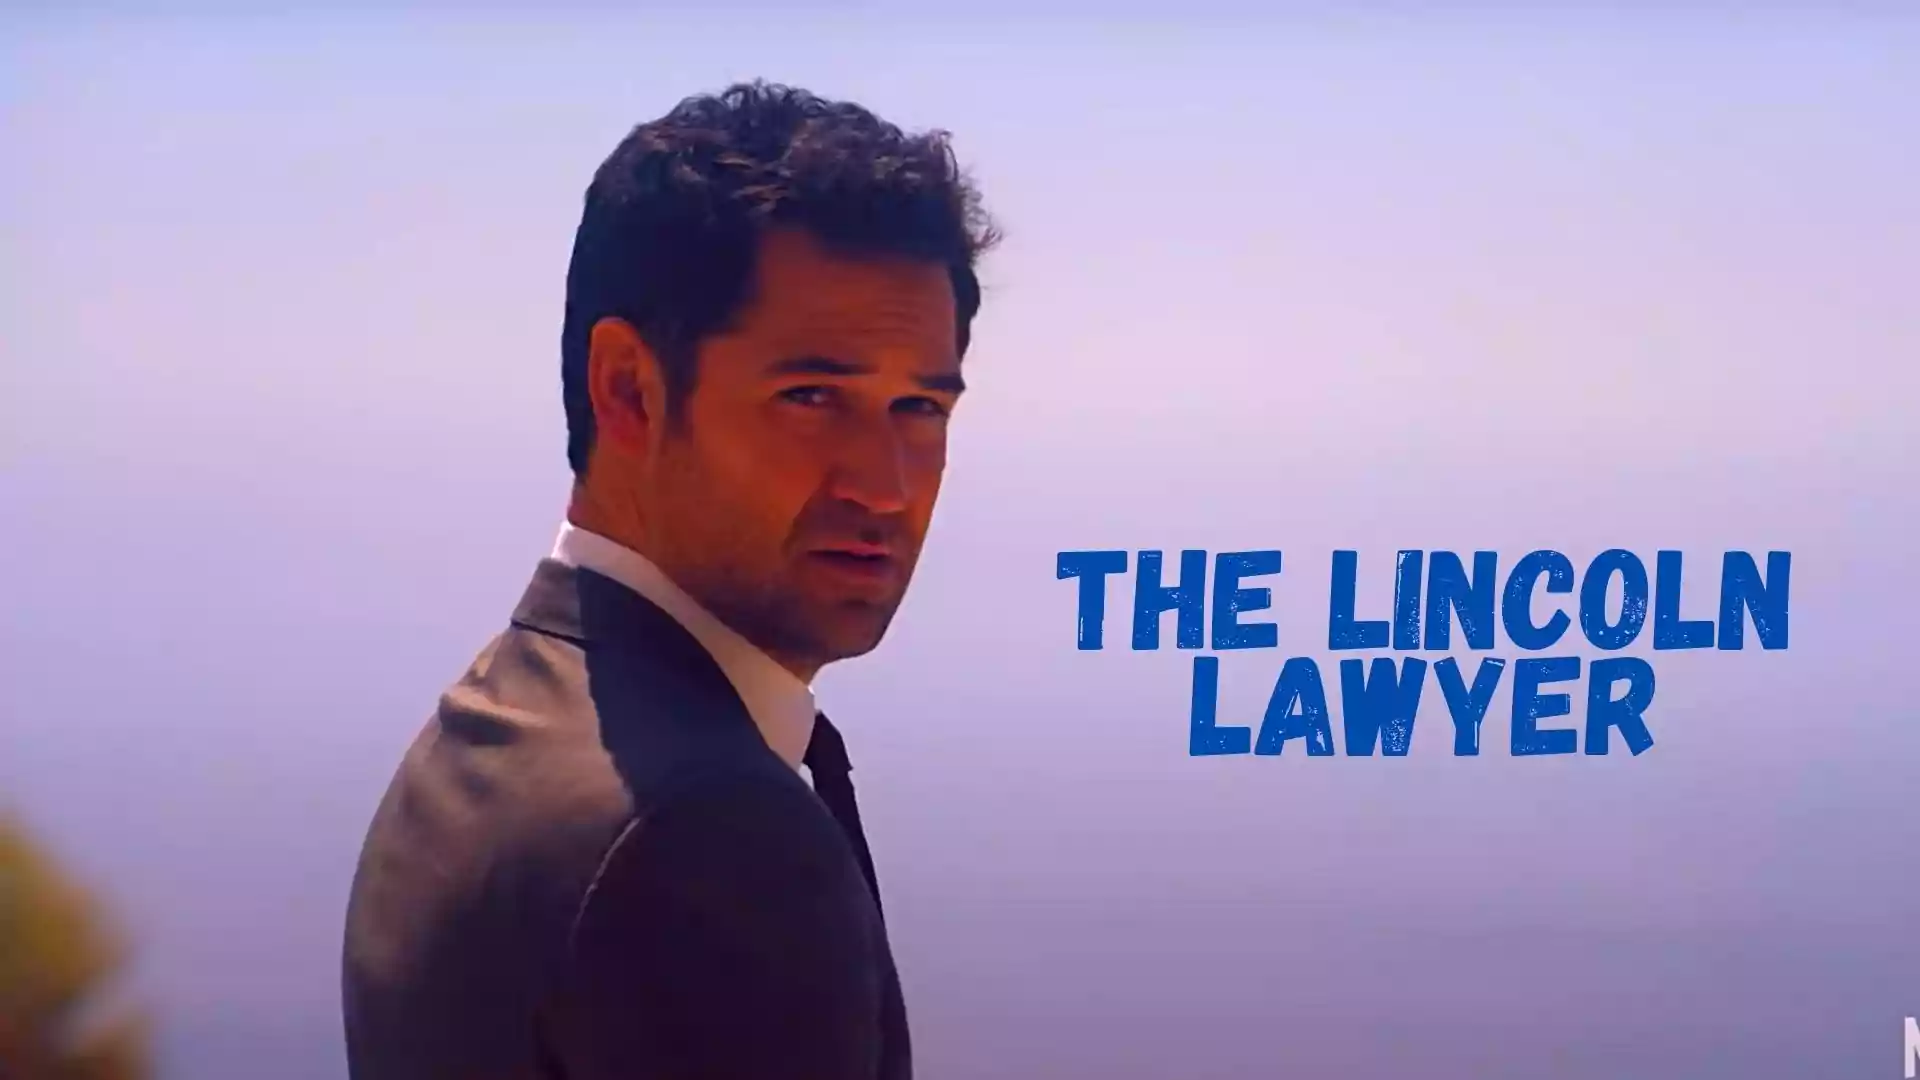 The Lincoln Lawyer Wallpaper and Image